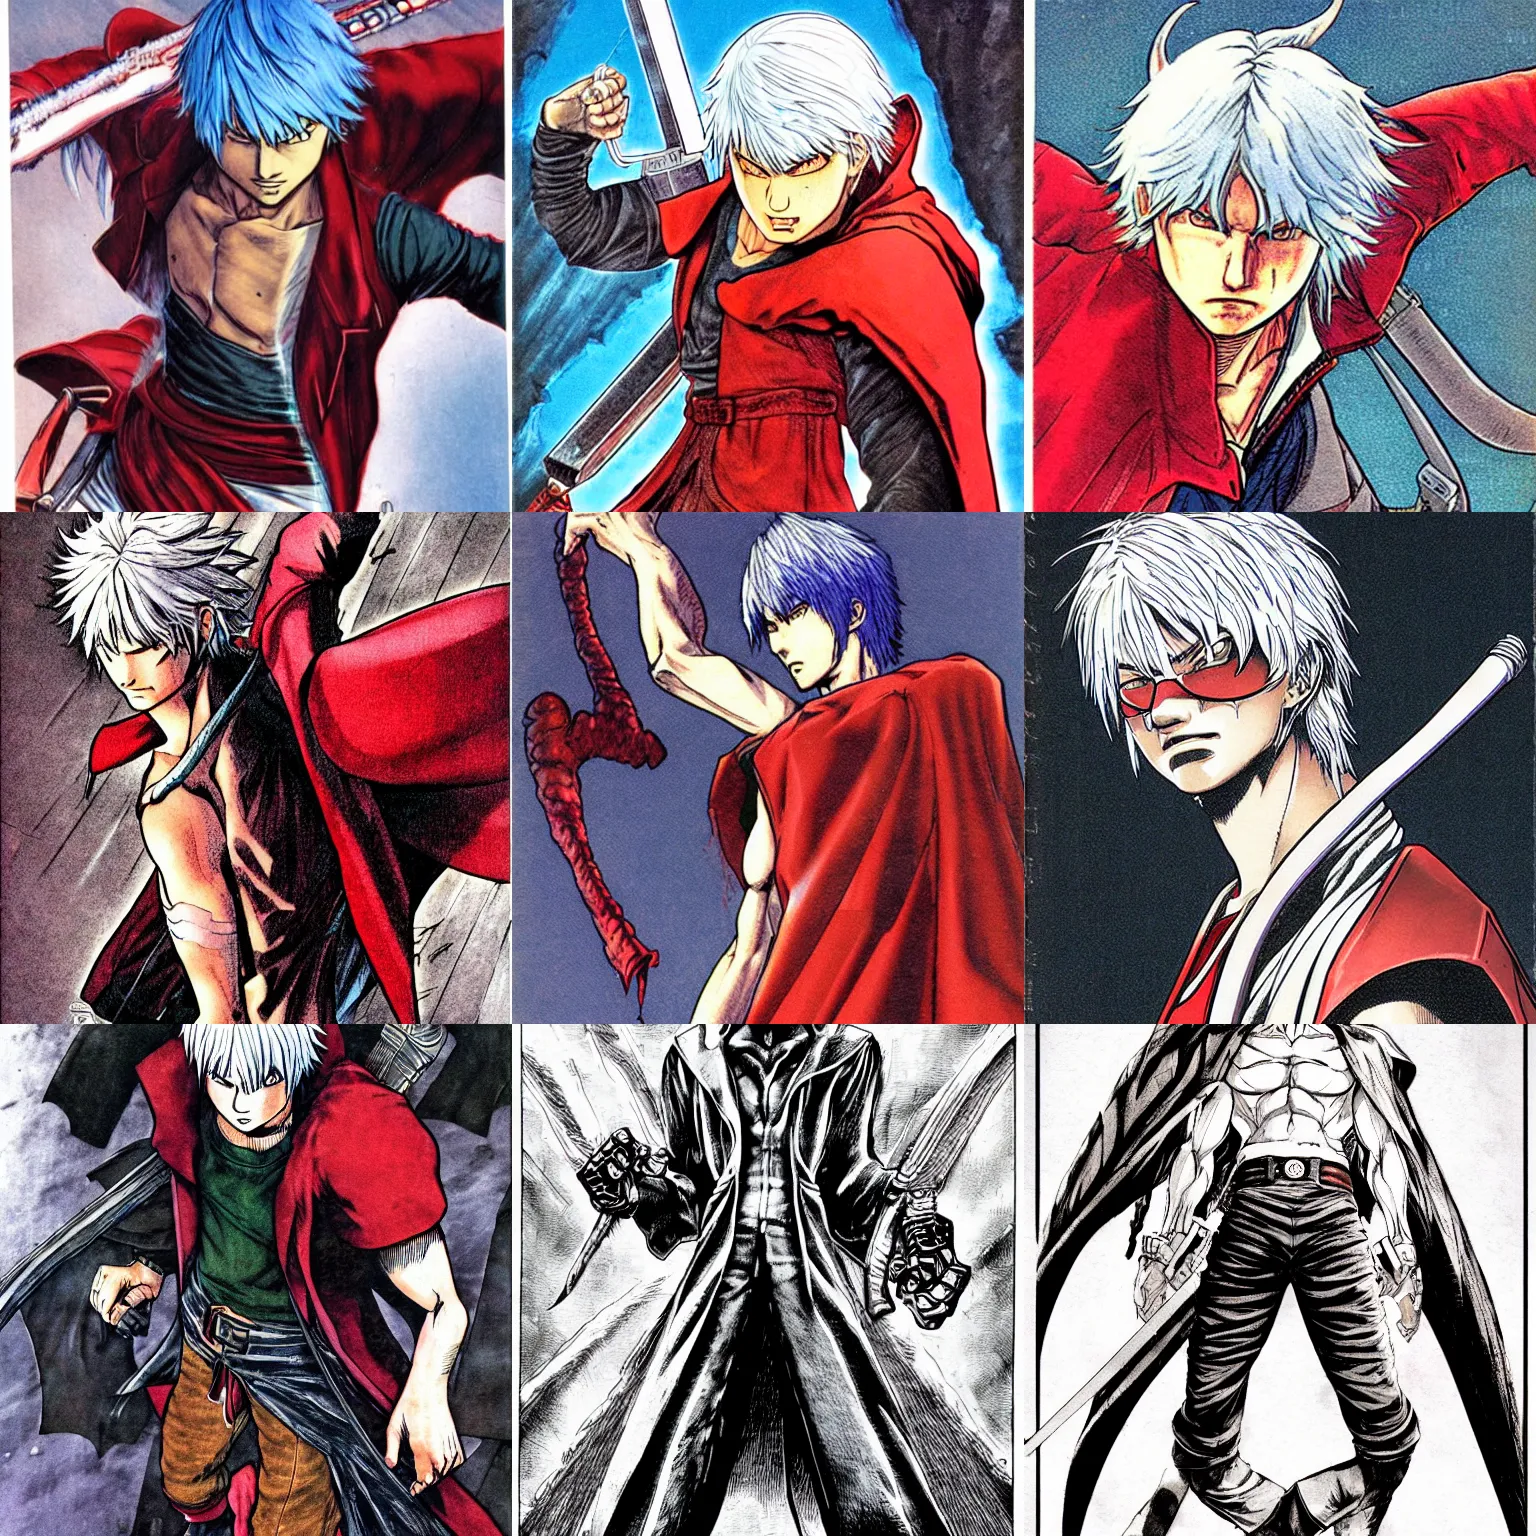 Prompt: Dante from devil may cry illustrated by Akira Toriyama